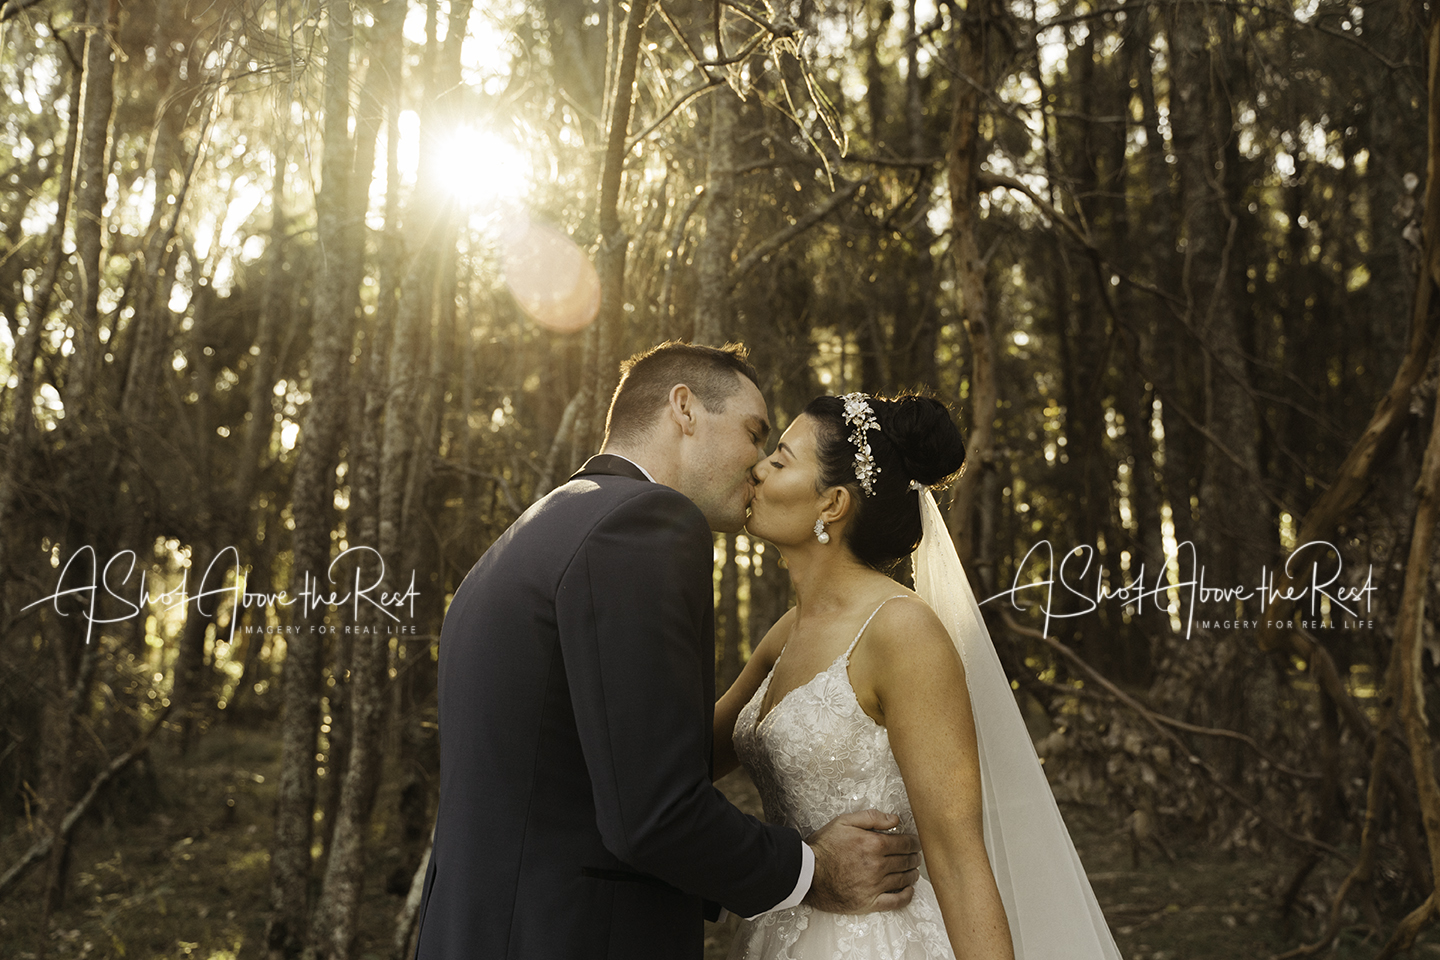 Shelby and Matthew are married at Murramarang Resort